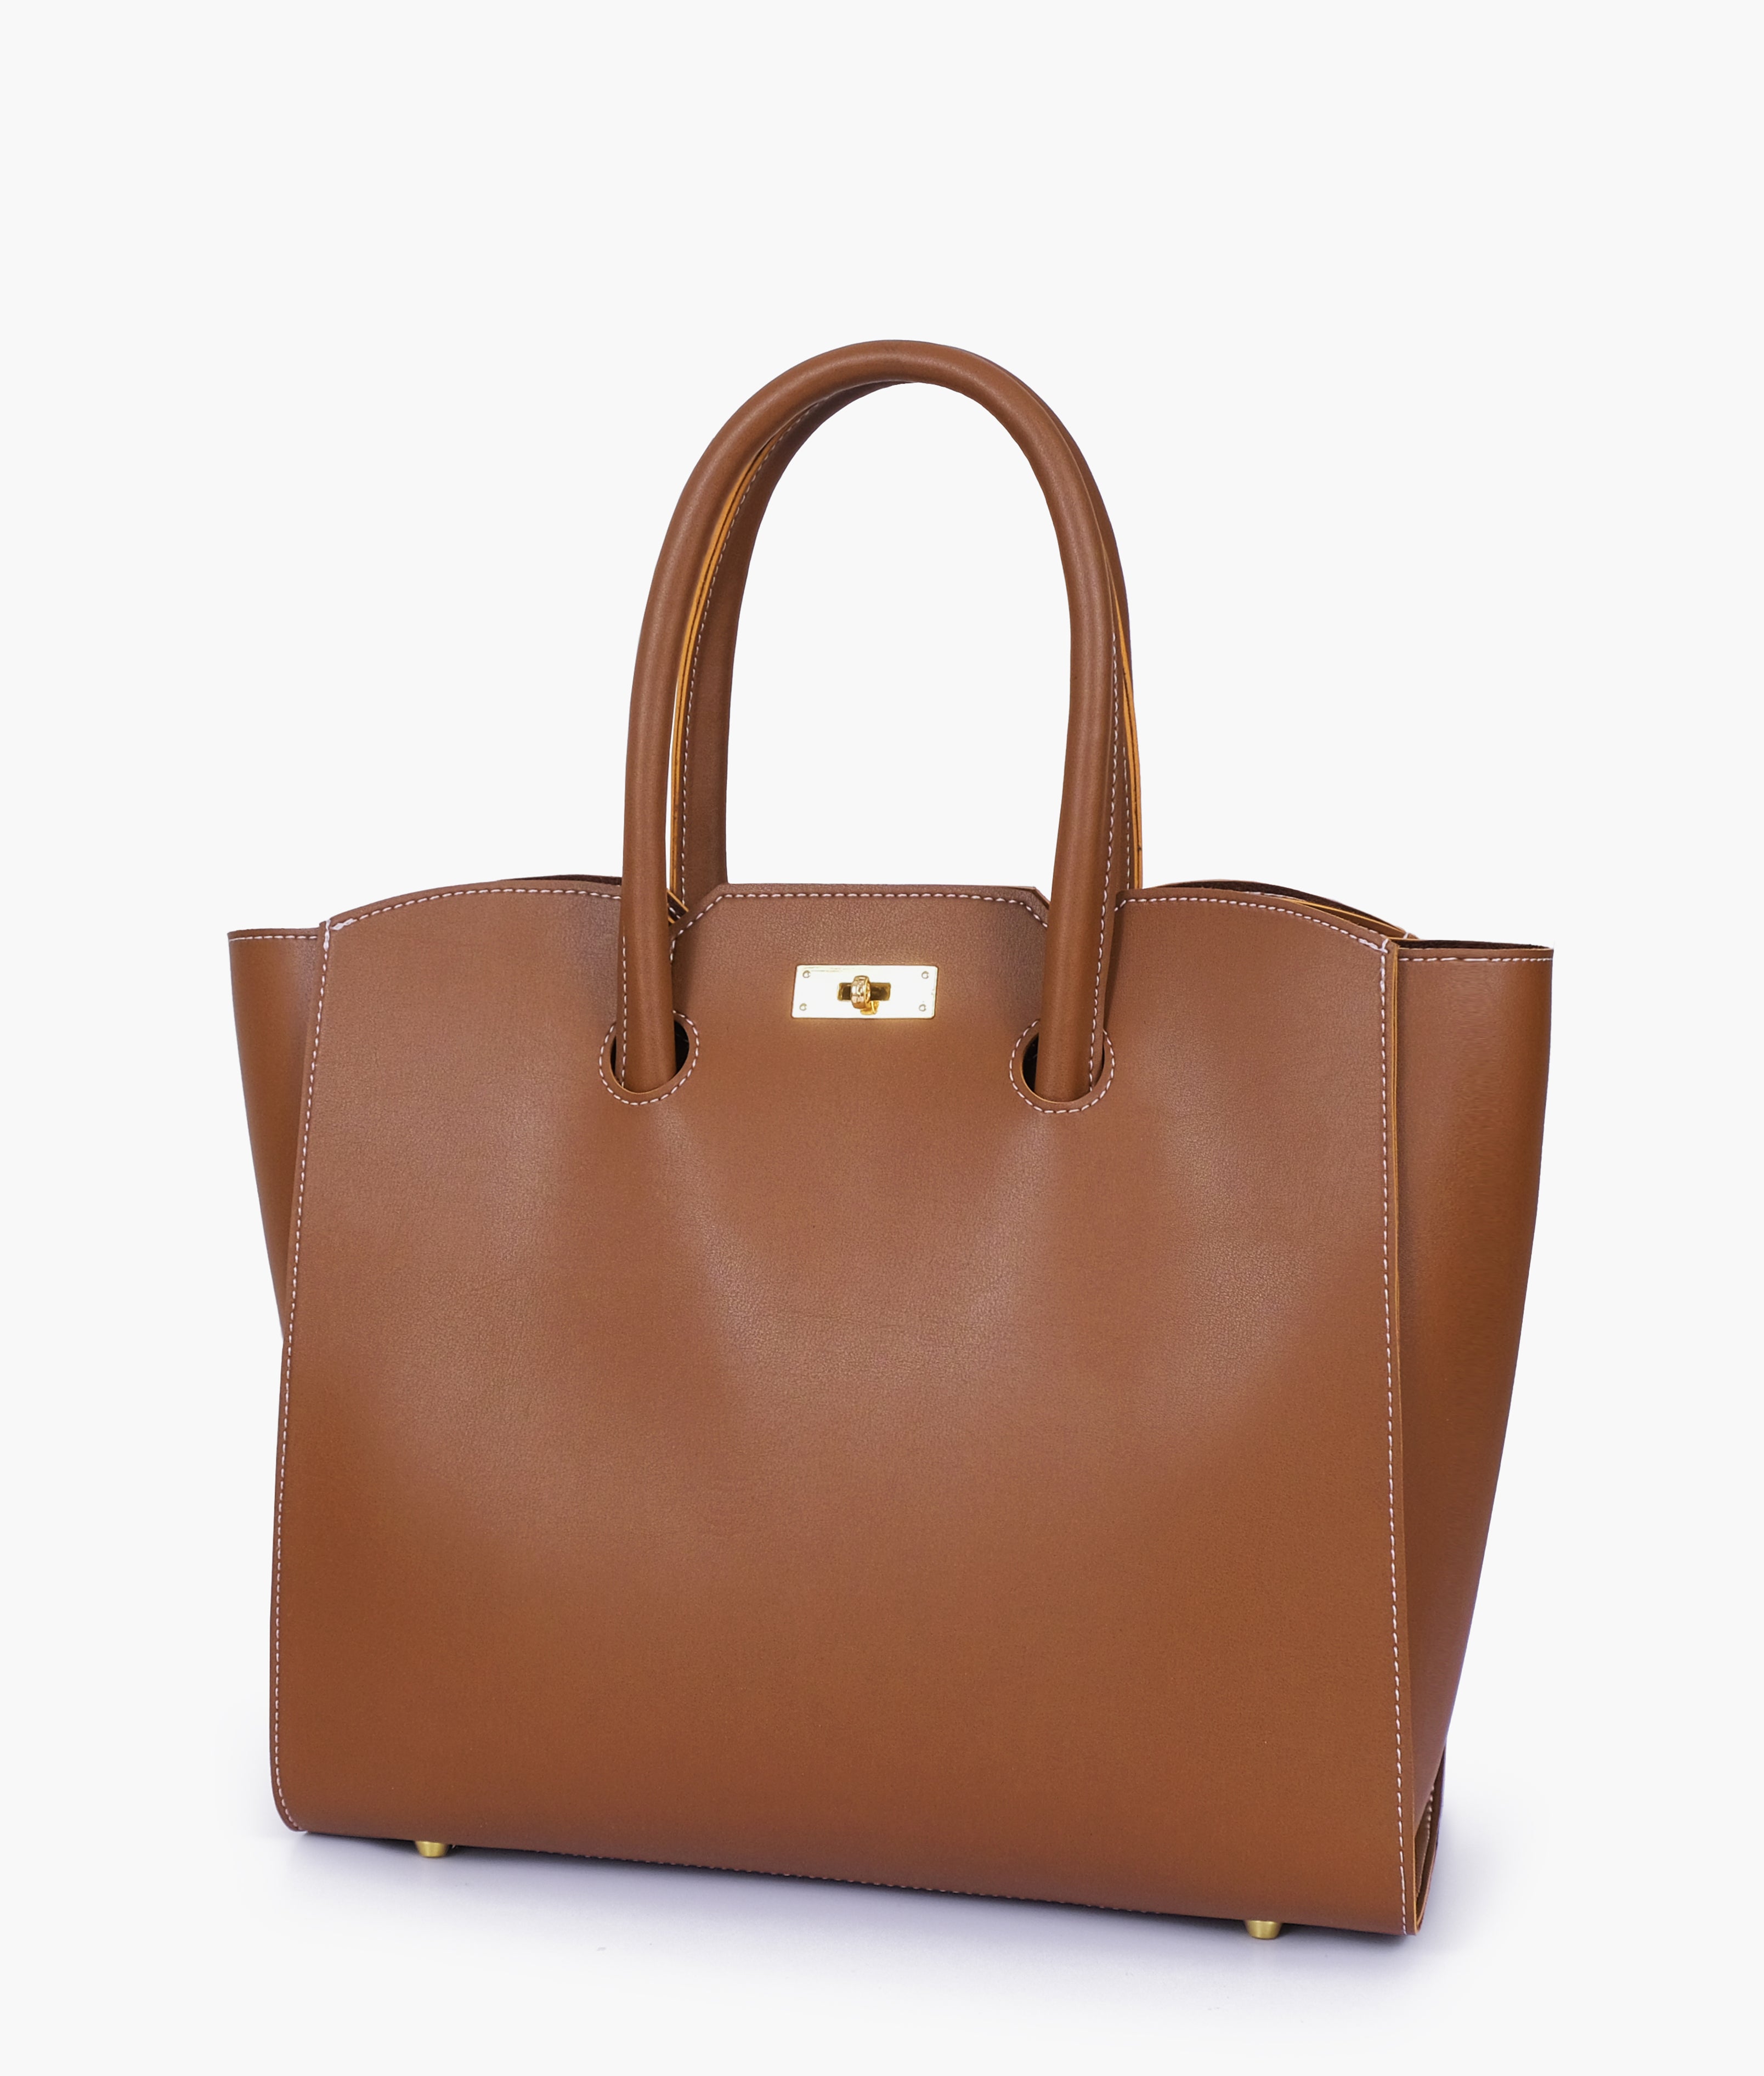 Brown tote bag with multiple compartments